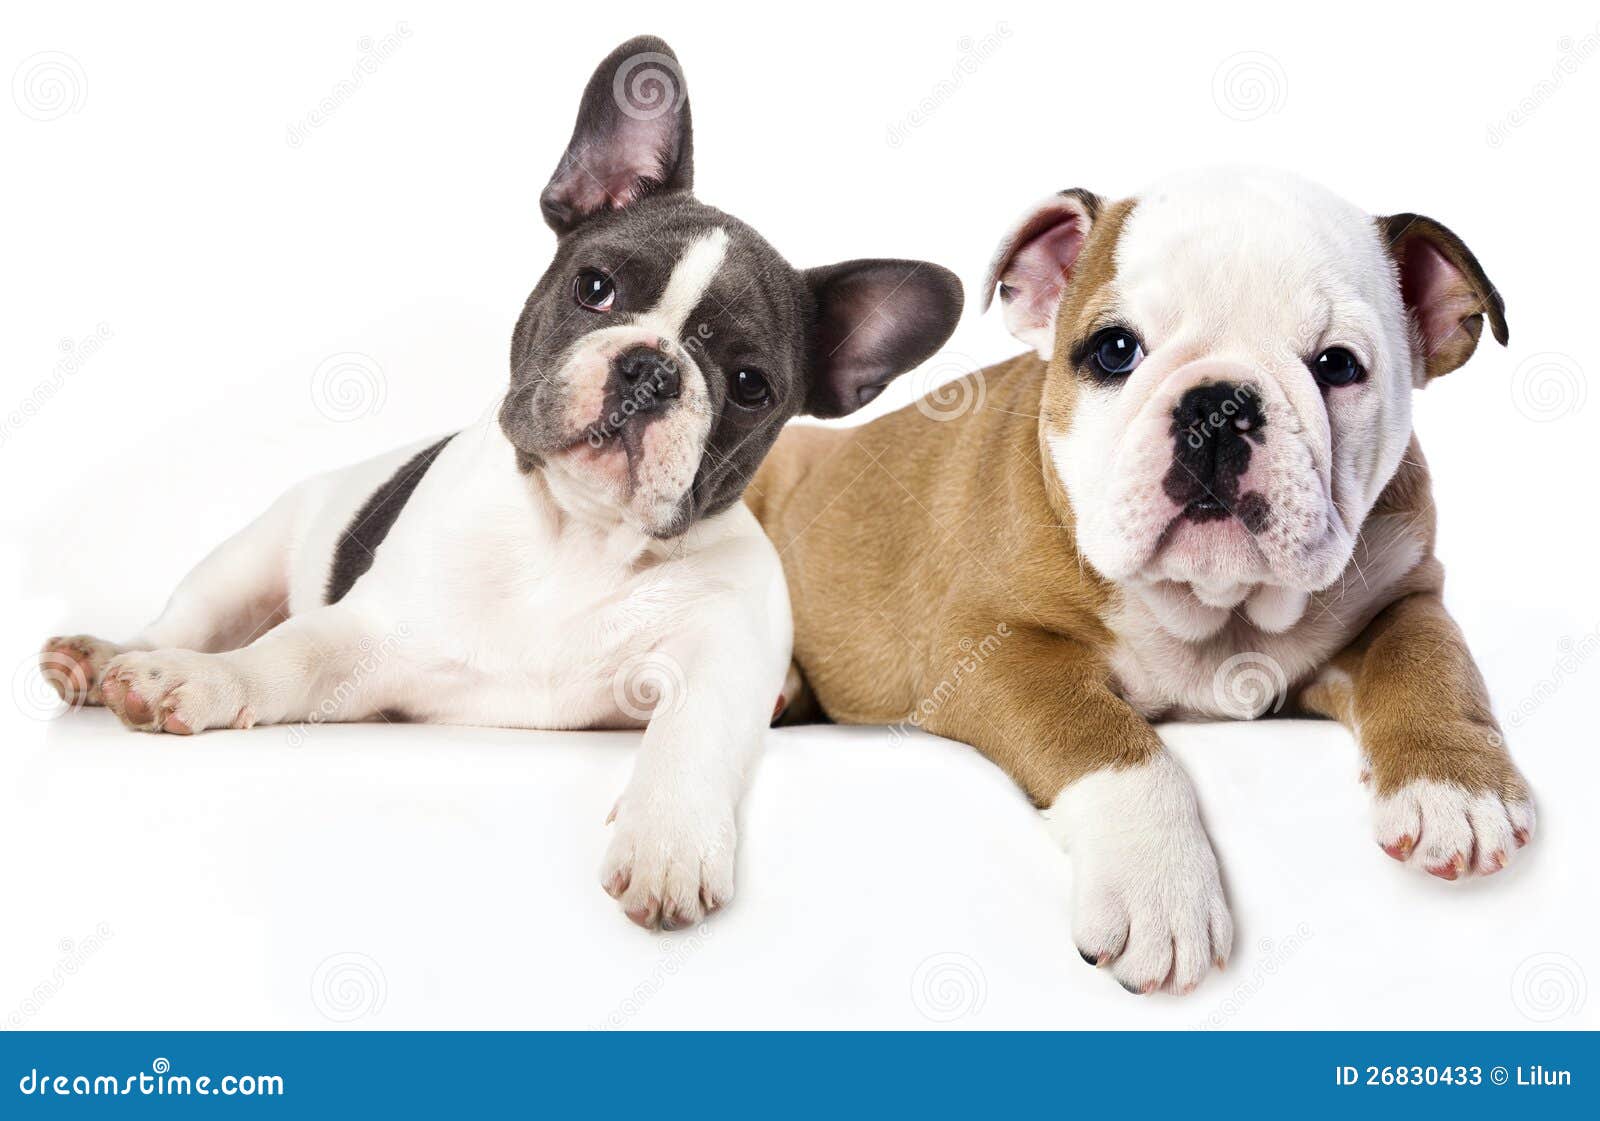 How Much Are French And English Bulldog Puppies